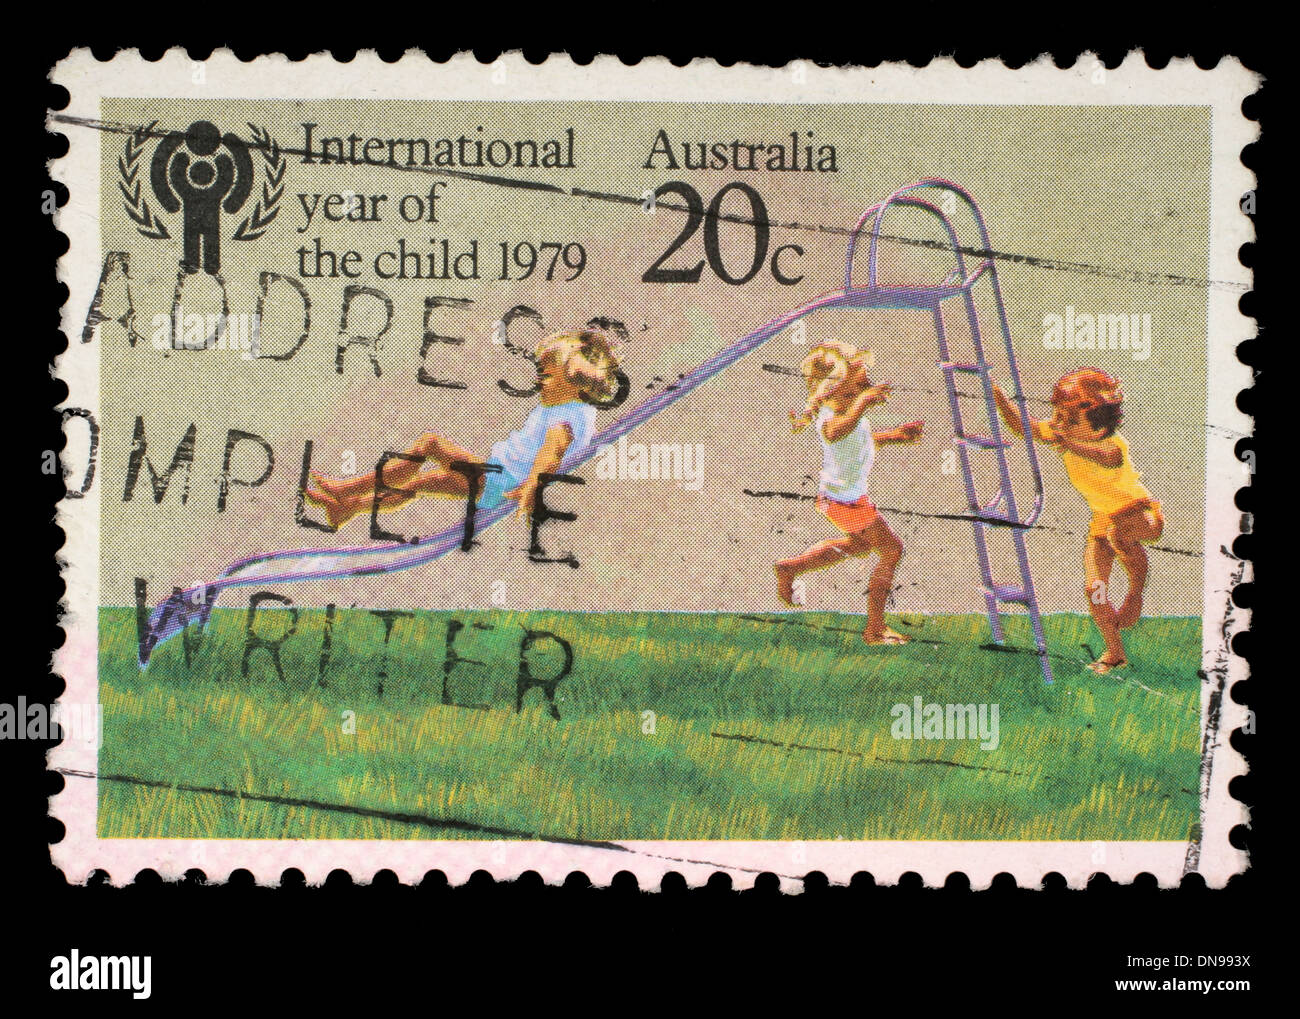 Stamp printed in Australia from the 'International Year of the Child' issue shows Children playing on Slide, circa 1979. Stock Photo